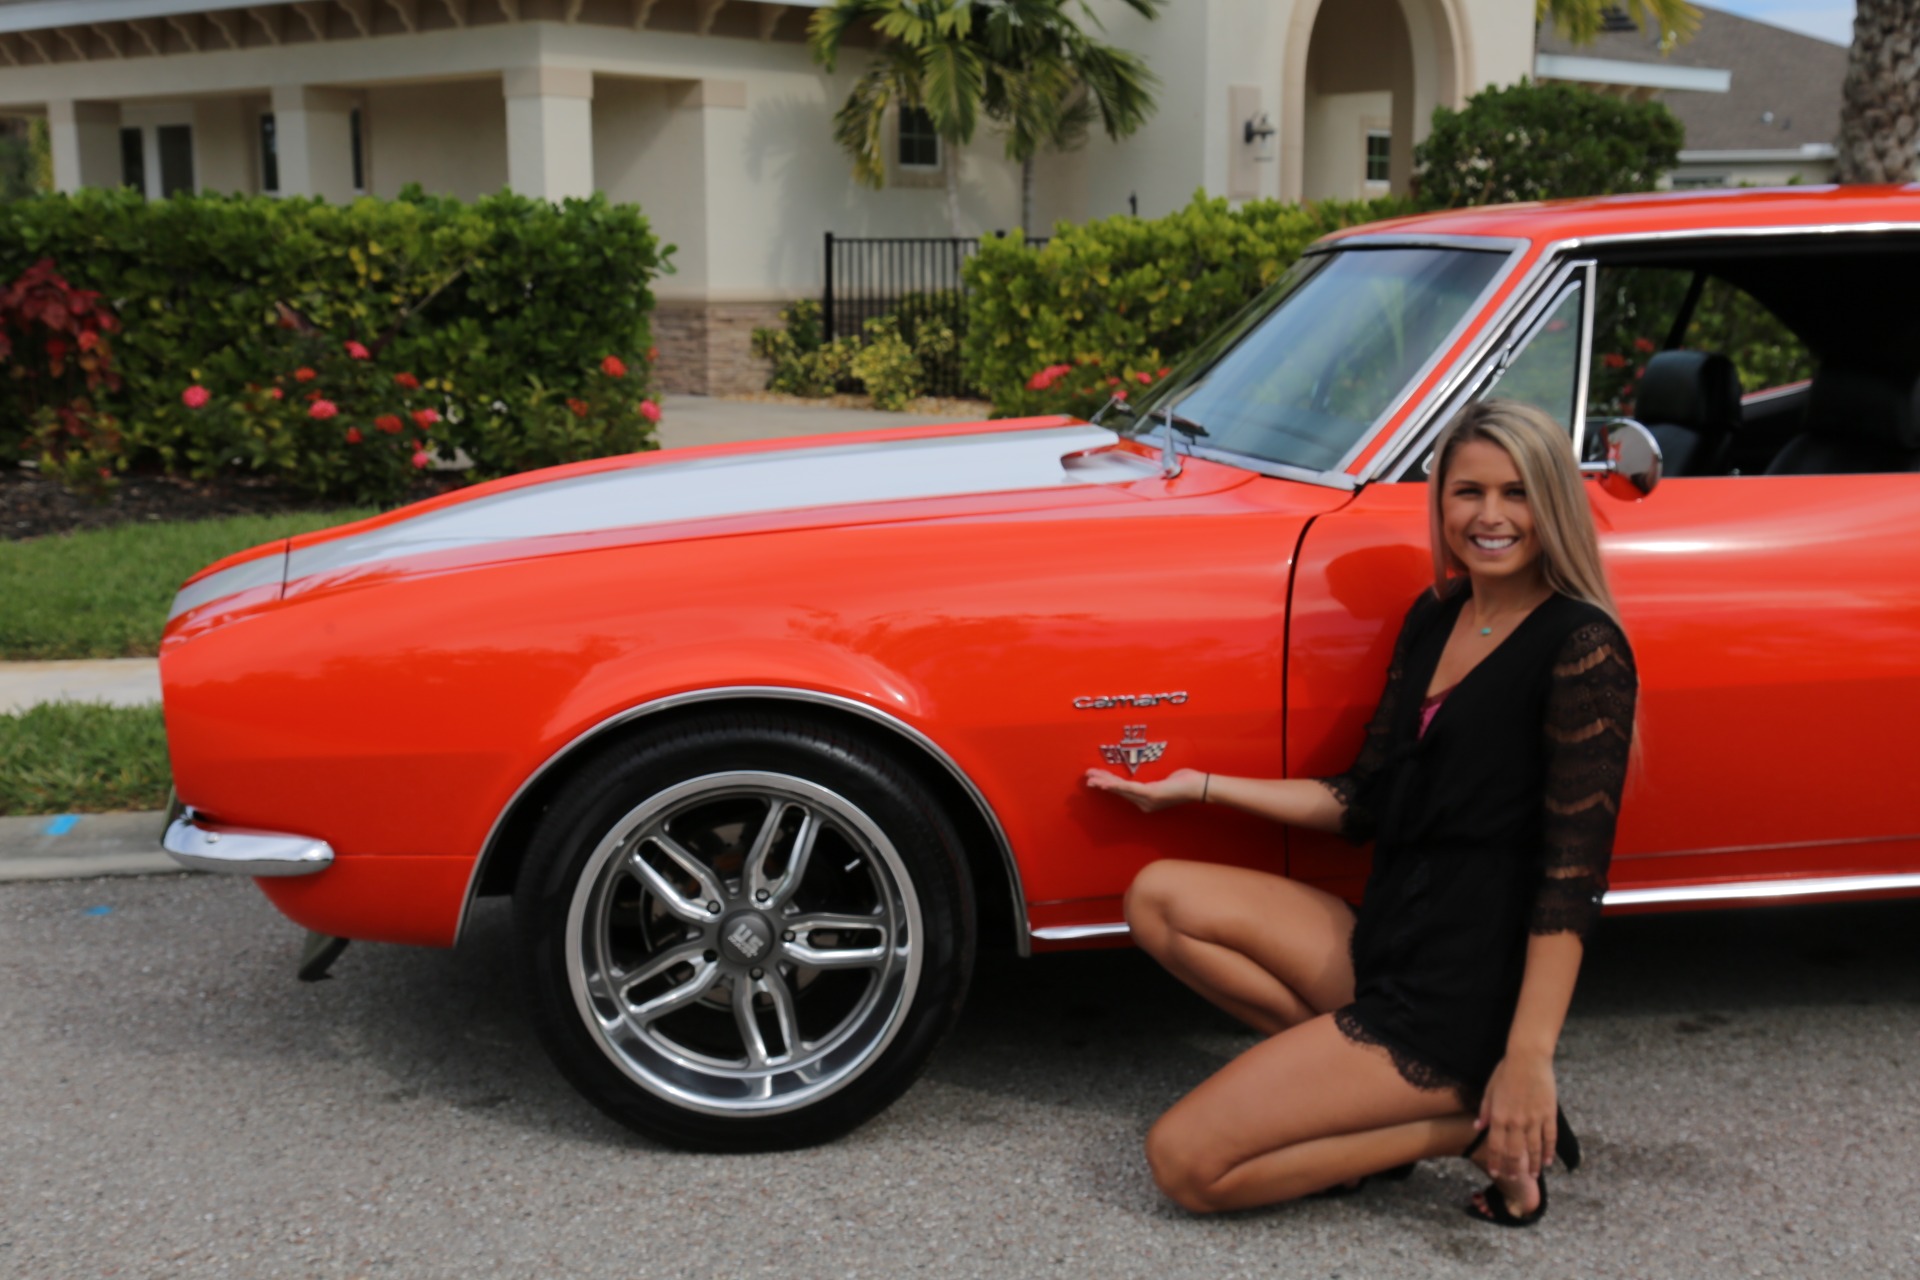 Used 1967 Chevy Camaro V8 Auto for sale Sold at Muscle Cars for Sale Inc. in Fort Myers FL 33912 2